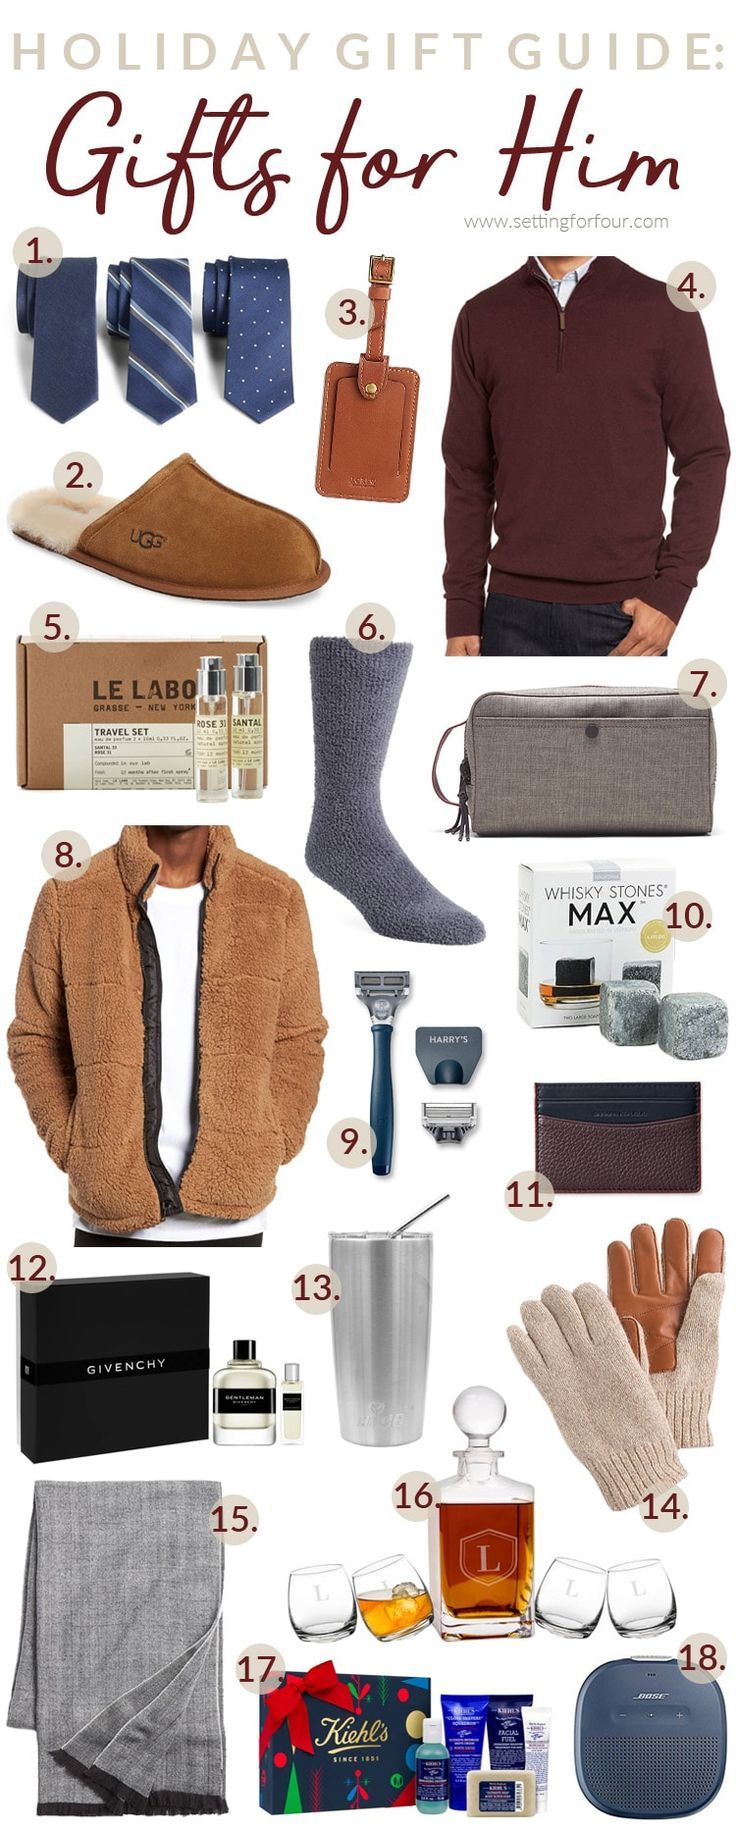 Holiday Gift Guide - Gifts for Him! #holiday #gifts #giftguide #christmas #chris...